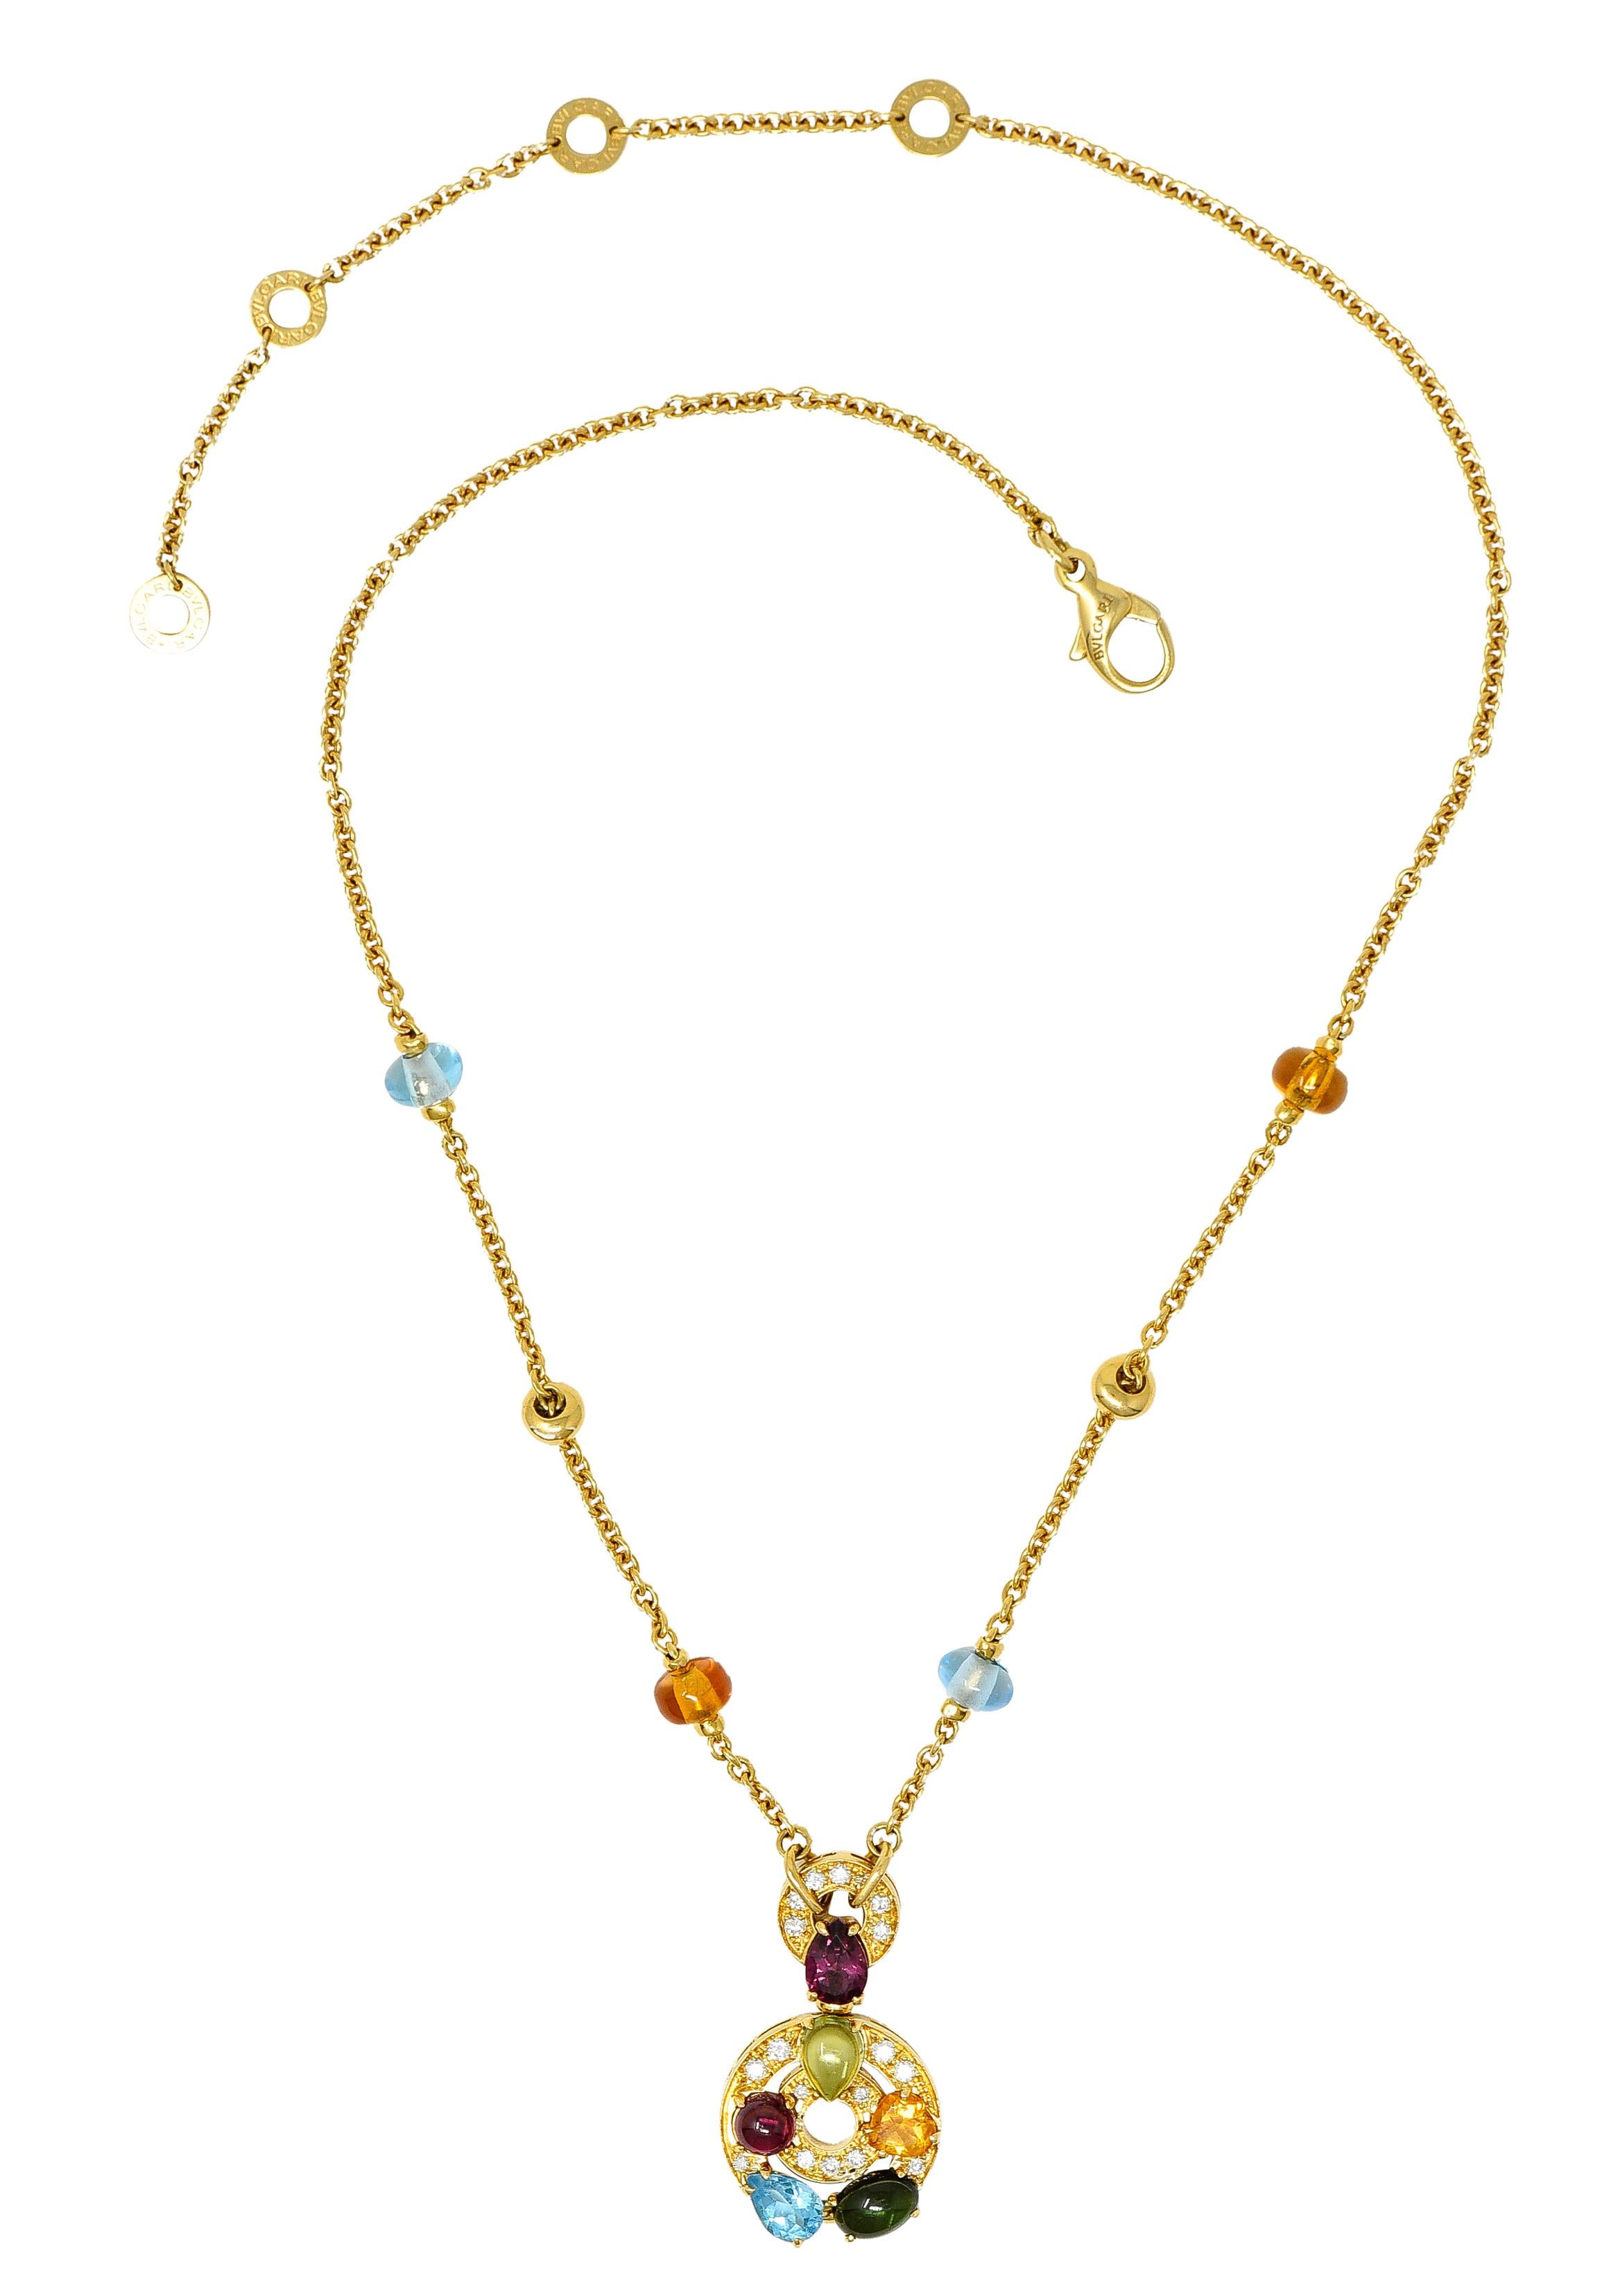 Cable chain necklace has six rondelle stations comprised of polished gold alternating with gemstone beads. Citrine and blue topaz - medium light in saturation and excellent polish. Suspending an articulated drop designed as a concentric circle